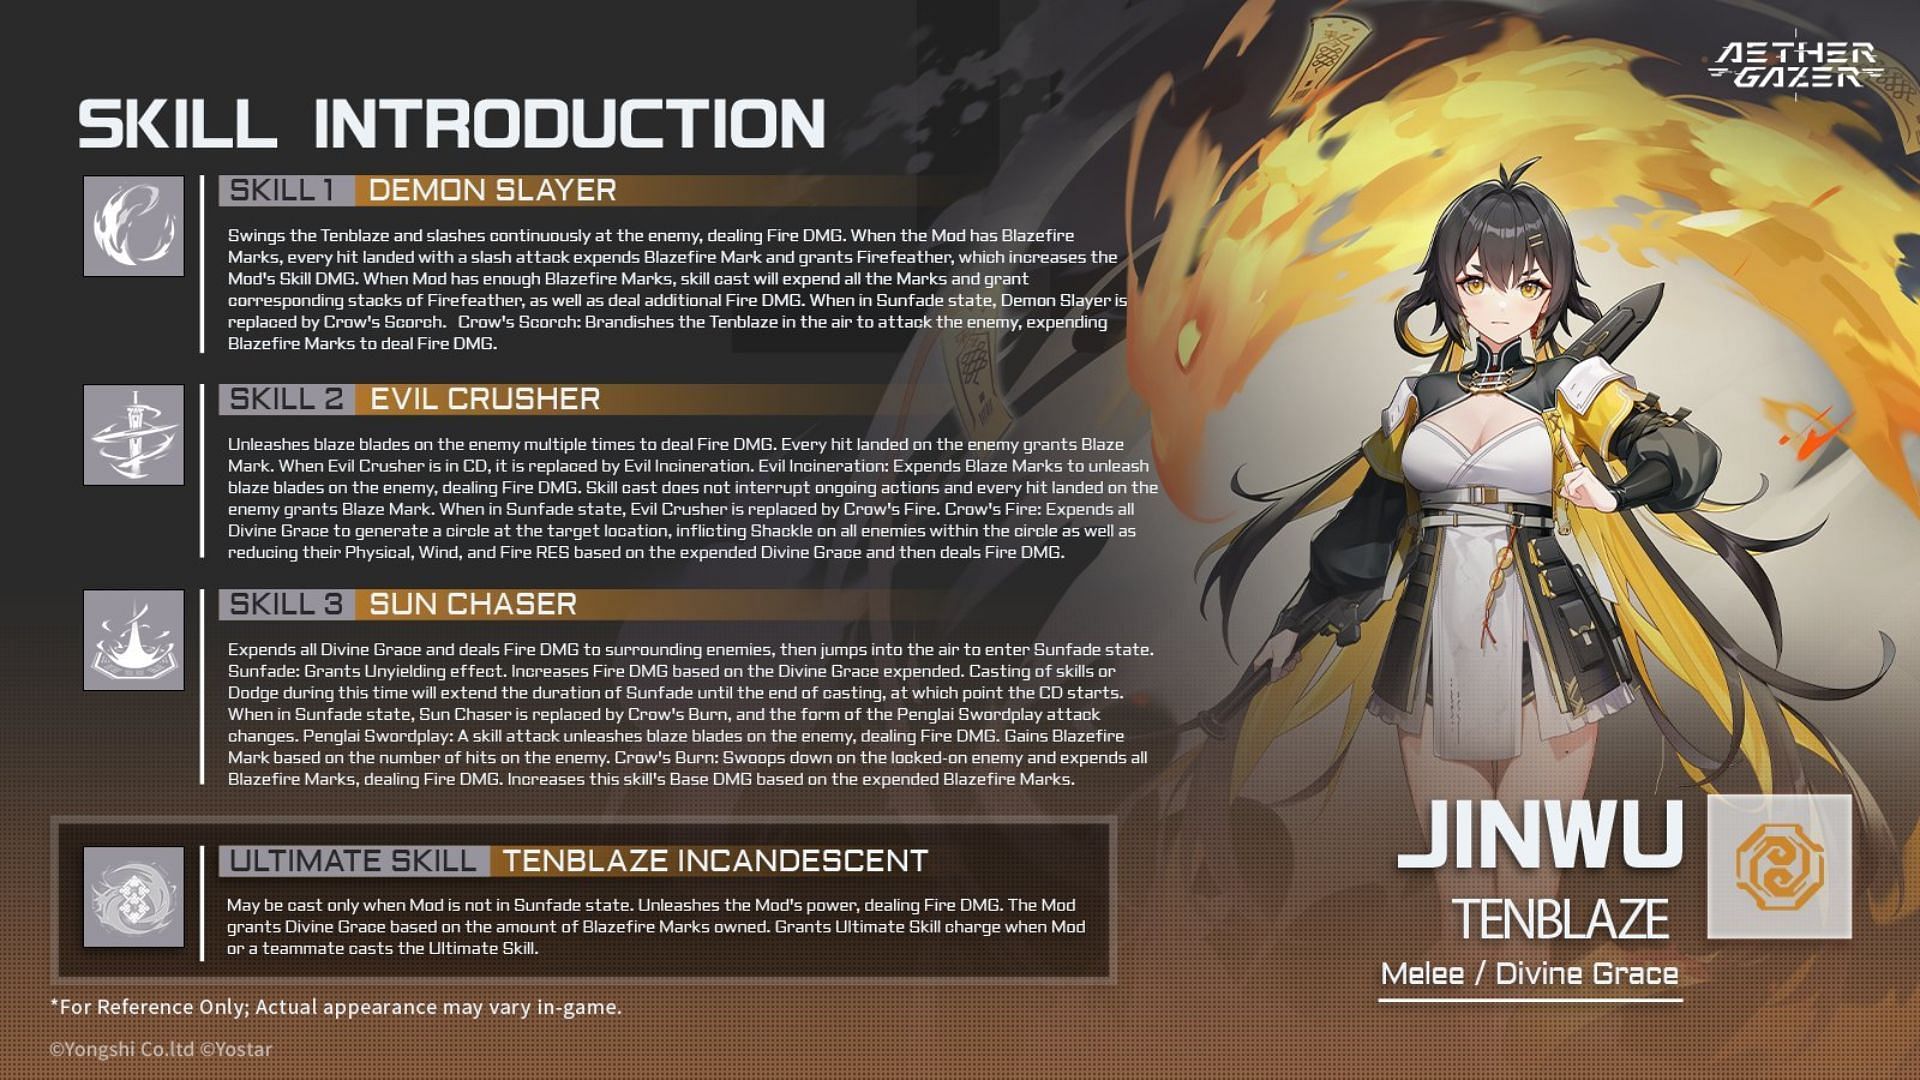 Tenblaze Jinwu will be available for free by completing missions in the Xu Heng Celebration event. (Image via Yostar)